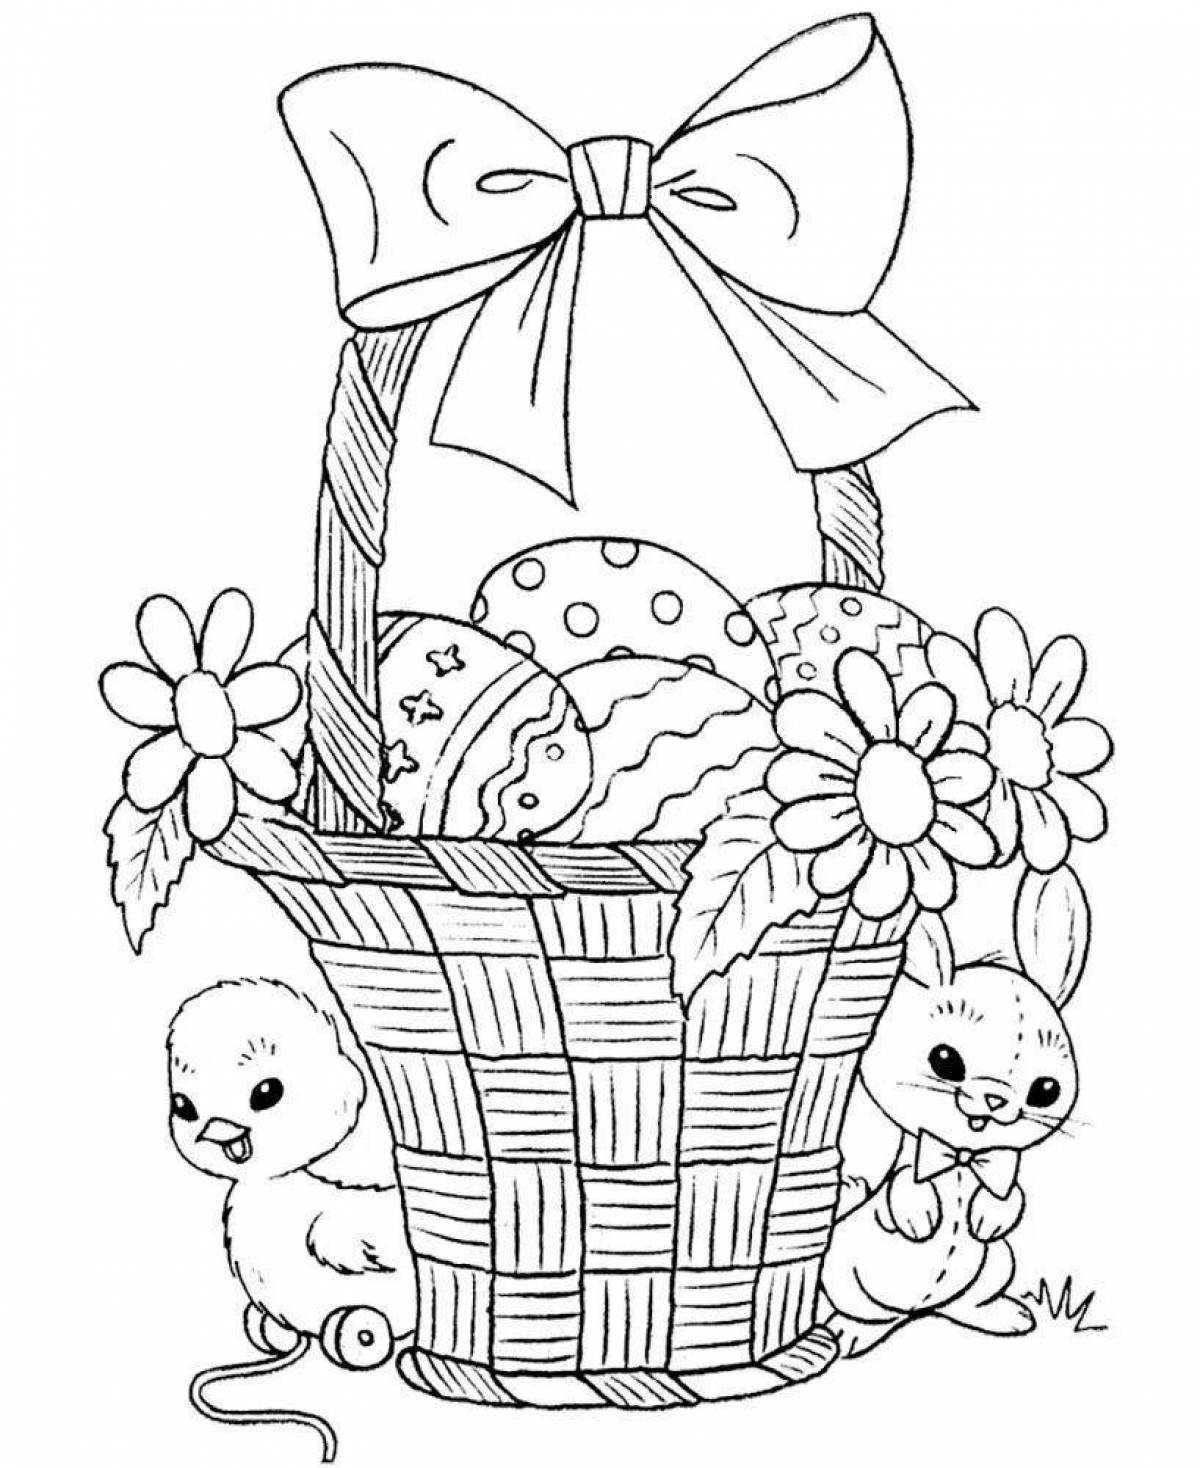 Fabulous Easter coloring book for kids